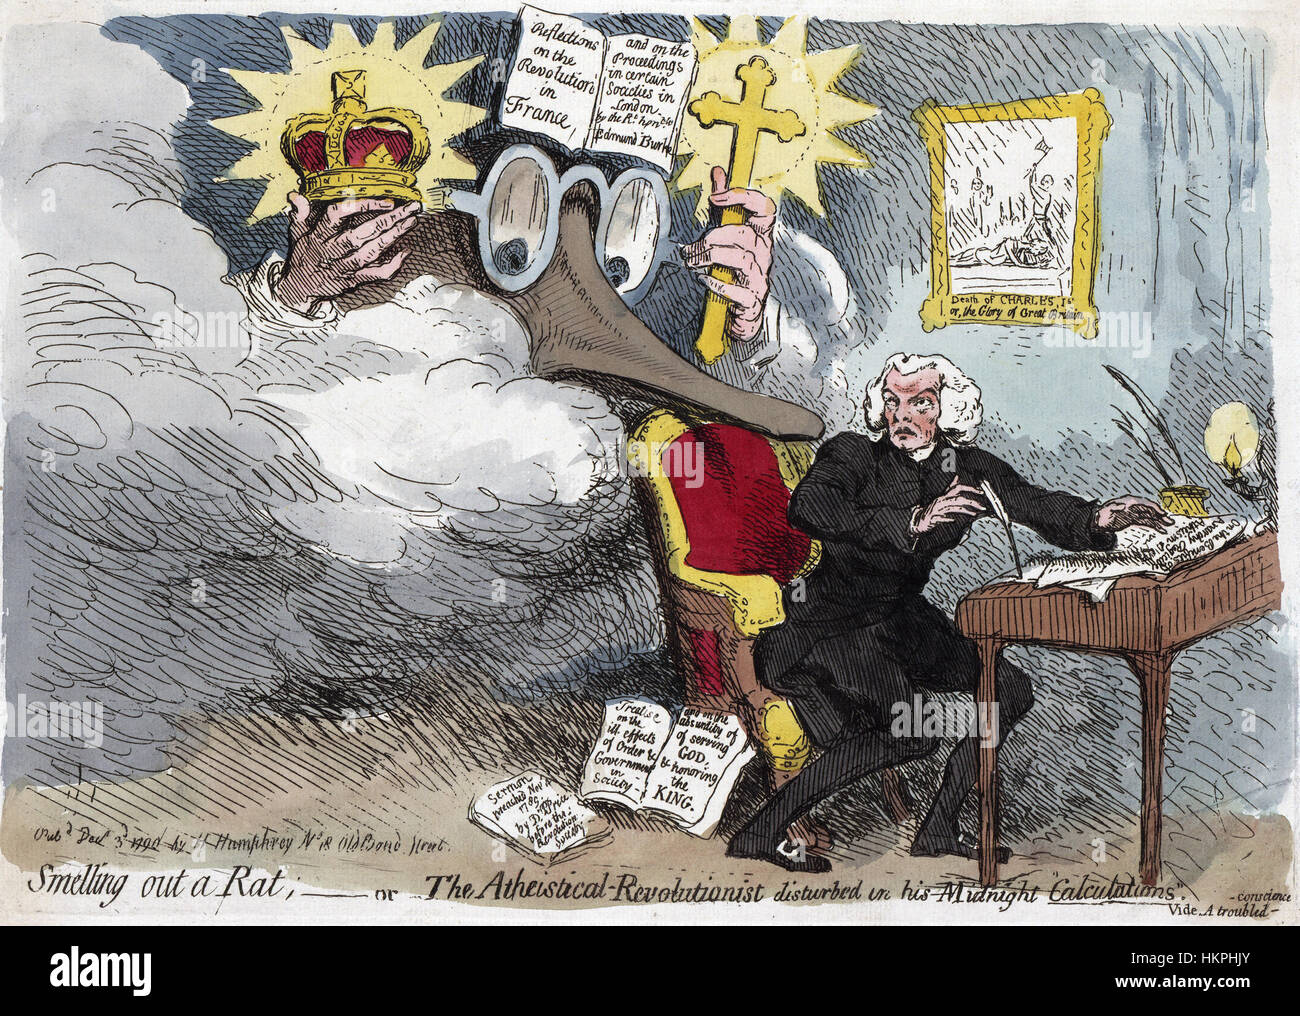 EDMUND BURKE ( 1729-1797) Irish statesman satirised in a 1790 cartoon by James Gillray. Burke's long nose is prodding Dr. Richard Price who is writing a piece 'On the Benefits of Anarchy Regicide Atheism'. On the wall is a picture showing the execution of Charles I Stock Photo